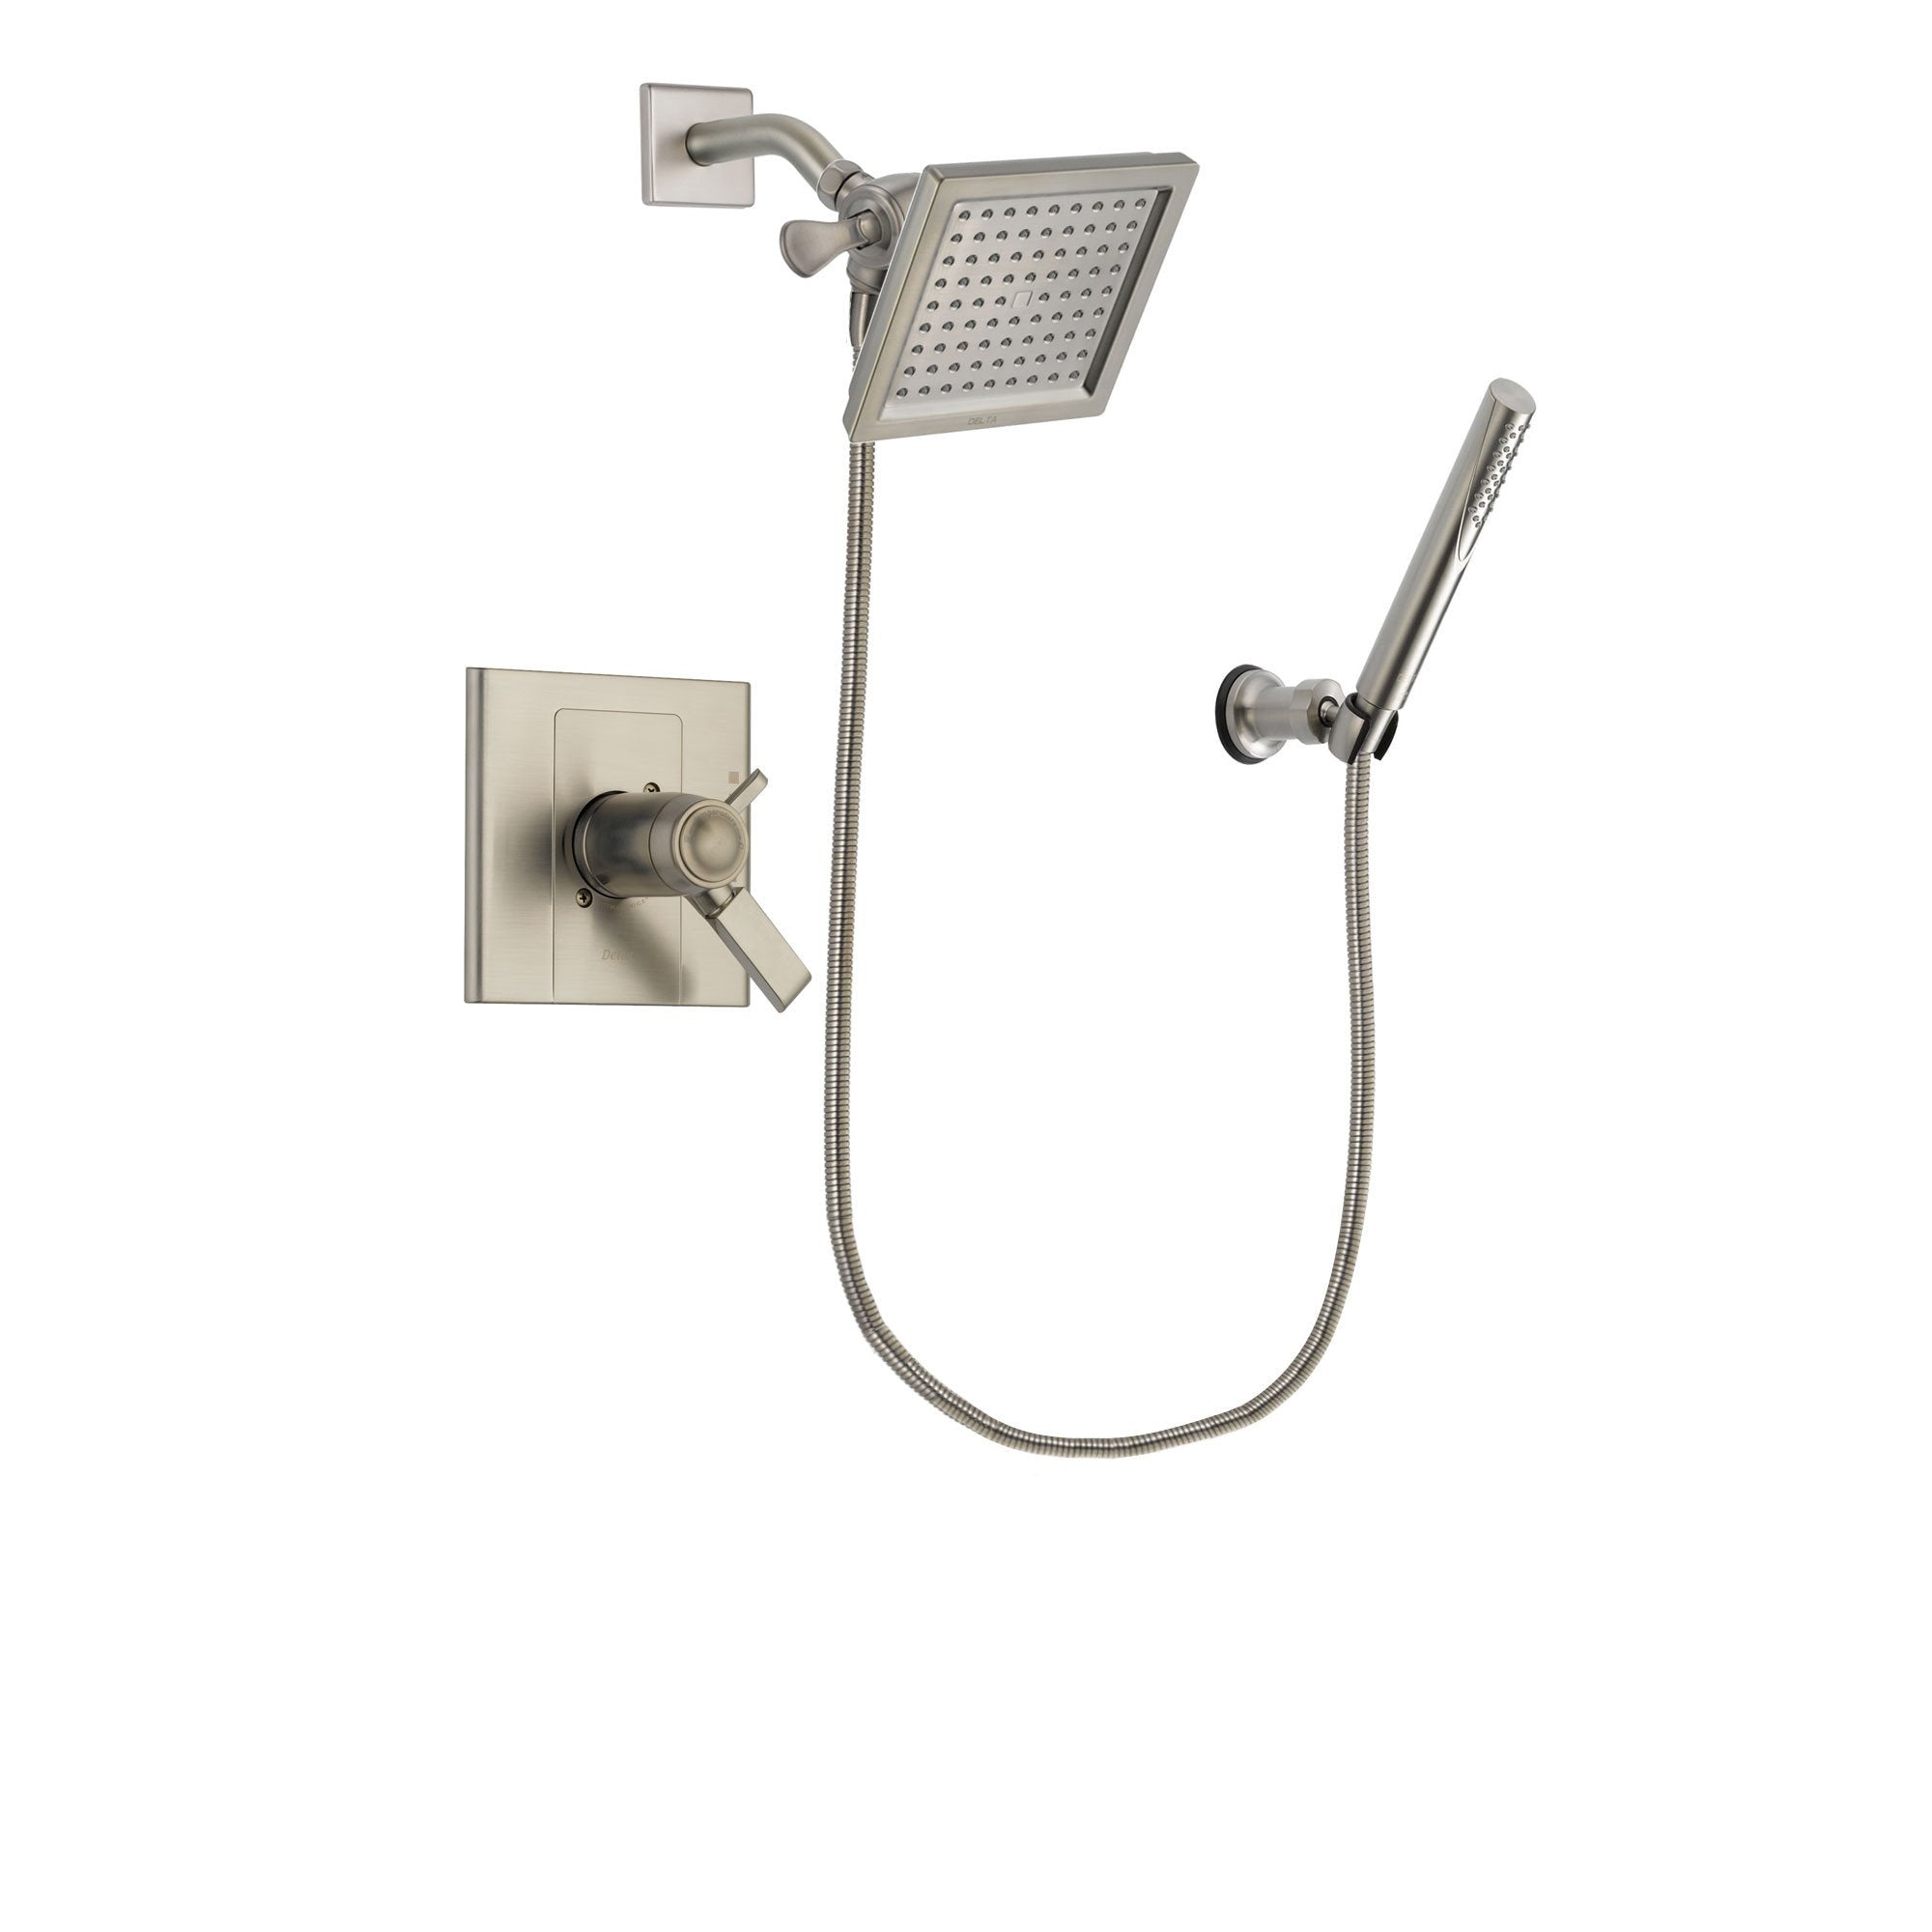 Delta Arzo Stainless Steel Finish Thermostatic Shower Faucet System Package with 6.5-inch Square Rain Showerhead and Modern Handheld Shower Spray Includes Rough-in Valve DSP2134V